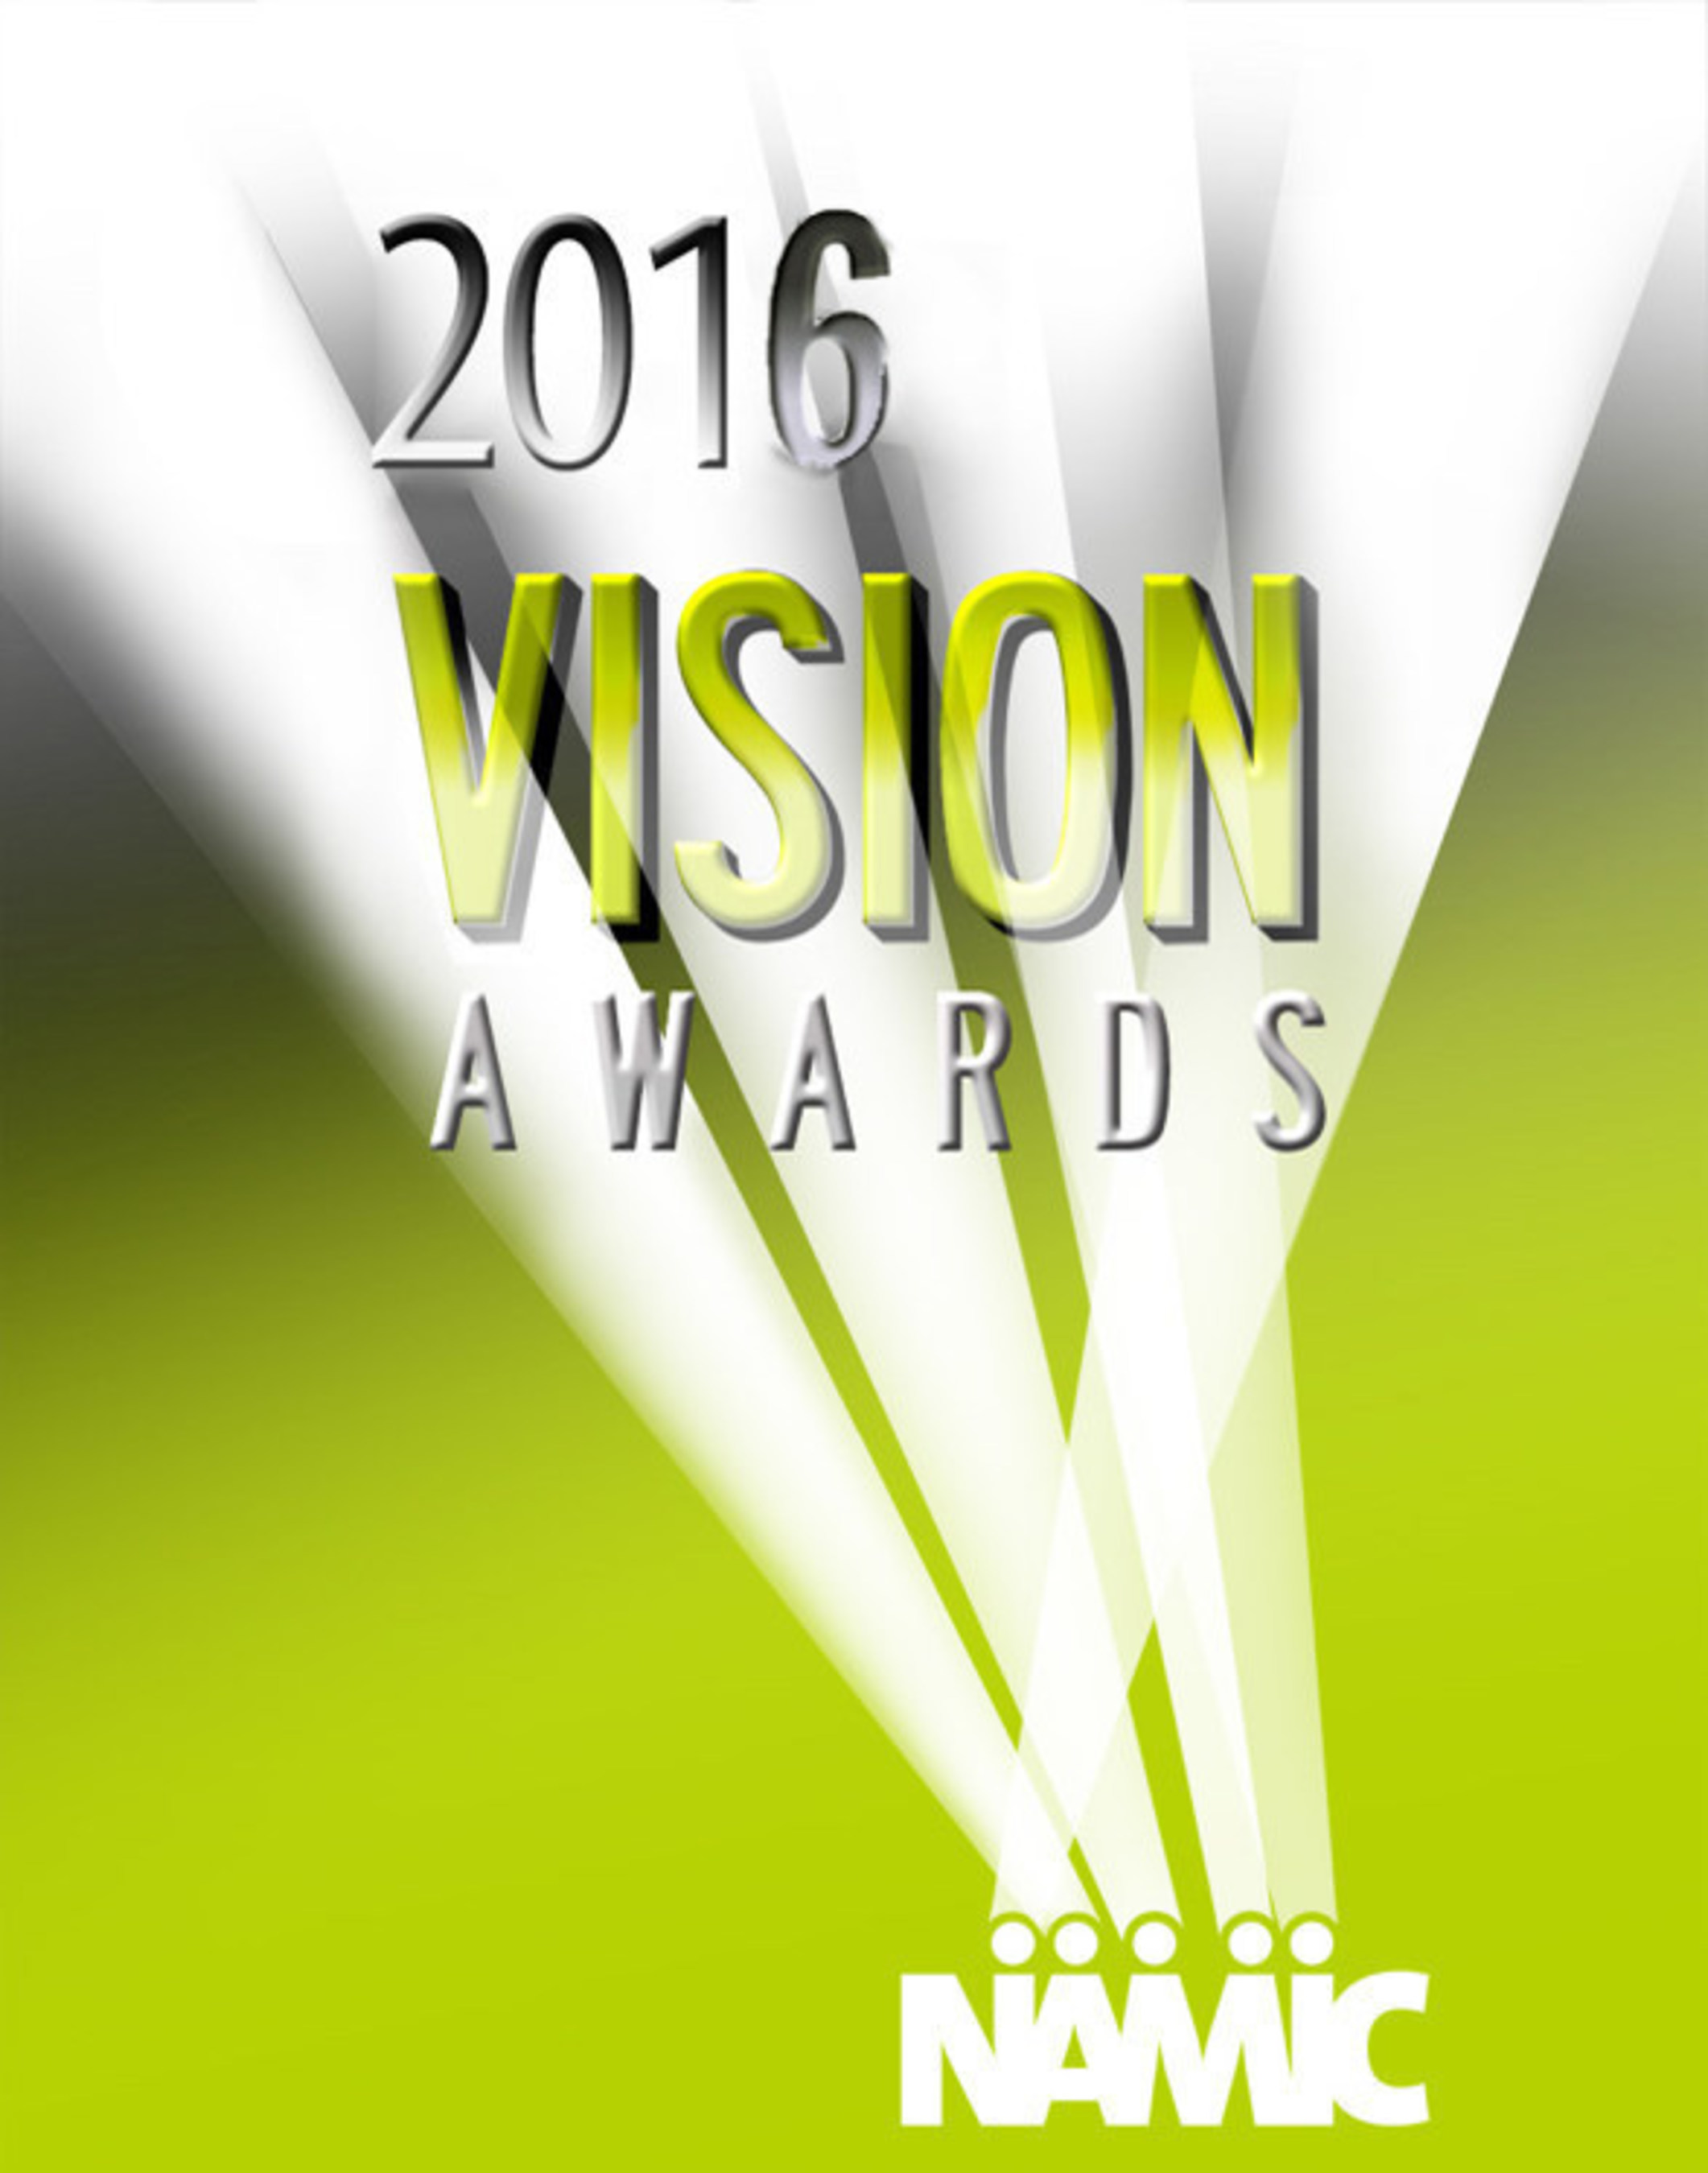 2016 NAMIC Vision Awards honoring achievements in television programming diversity.